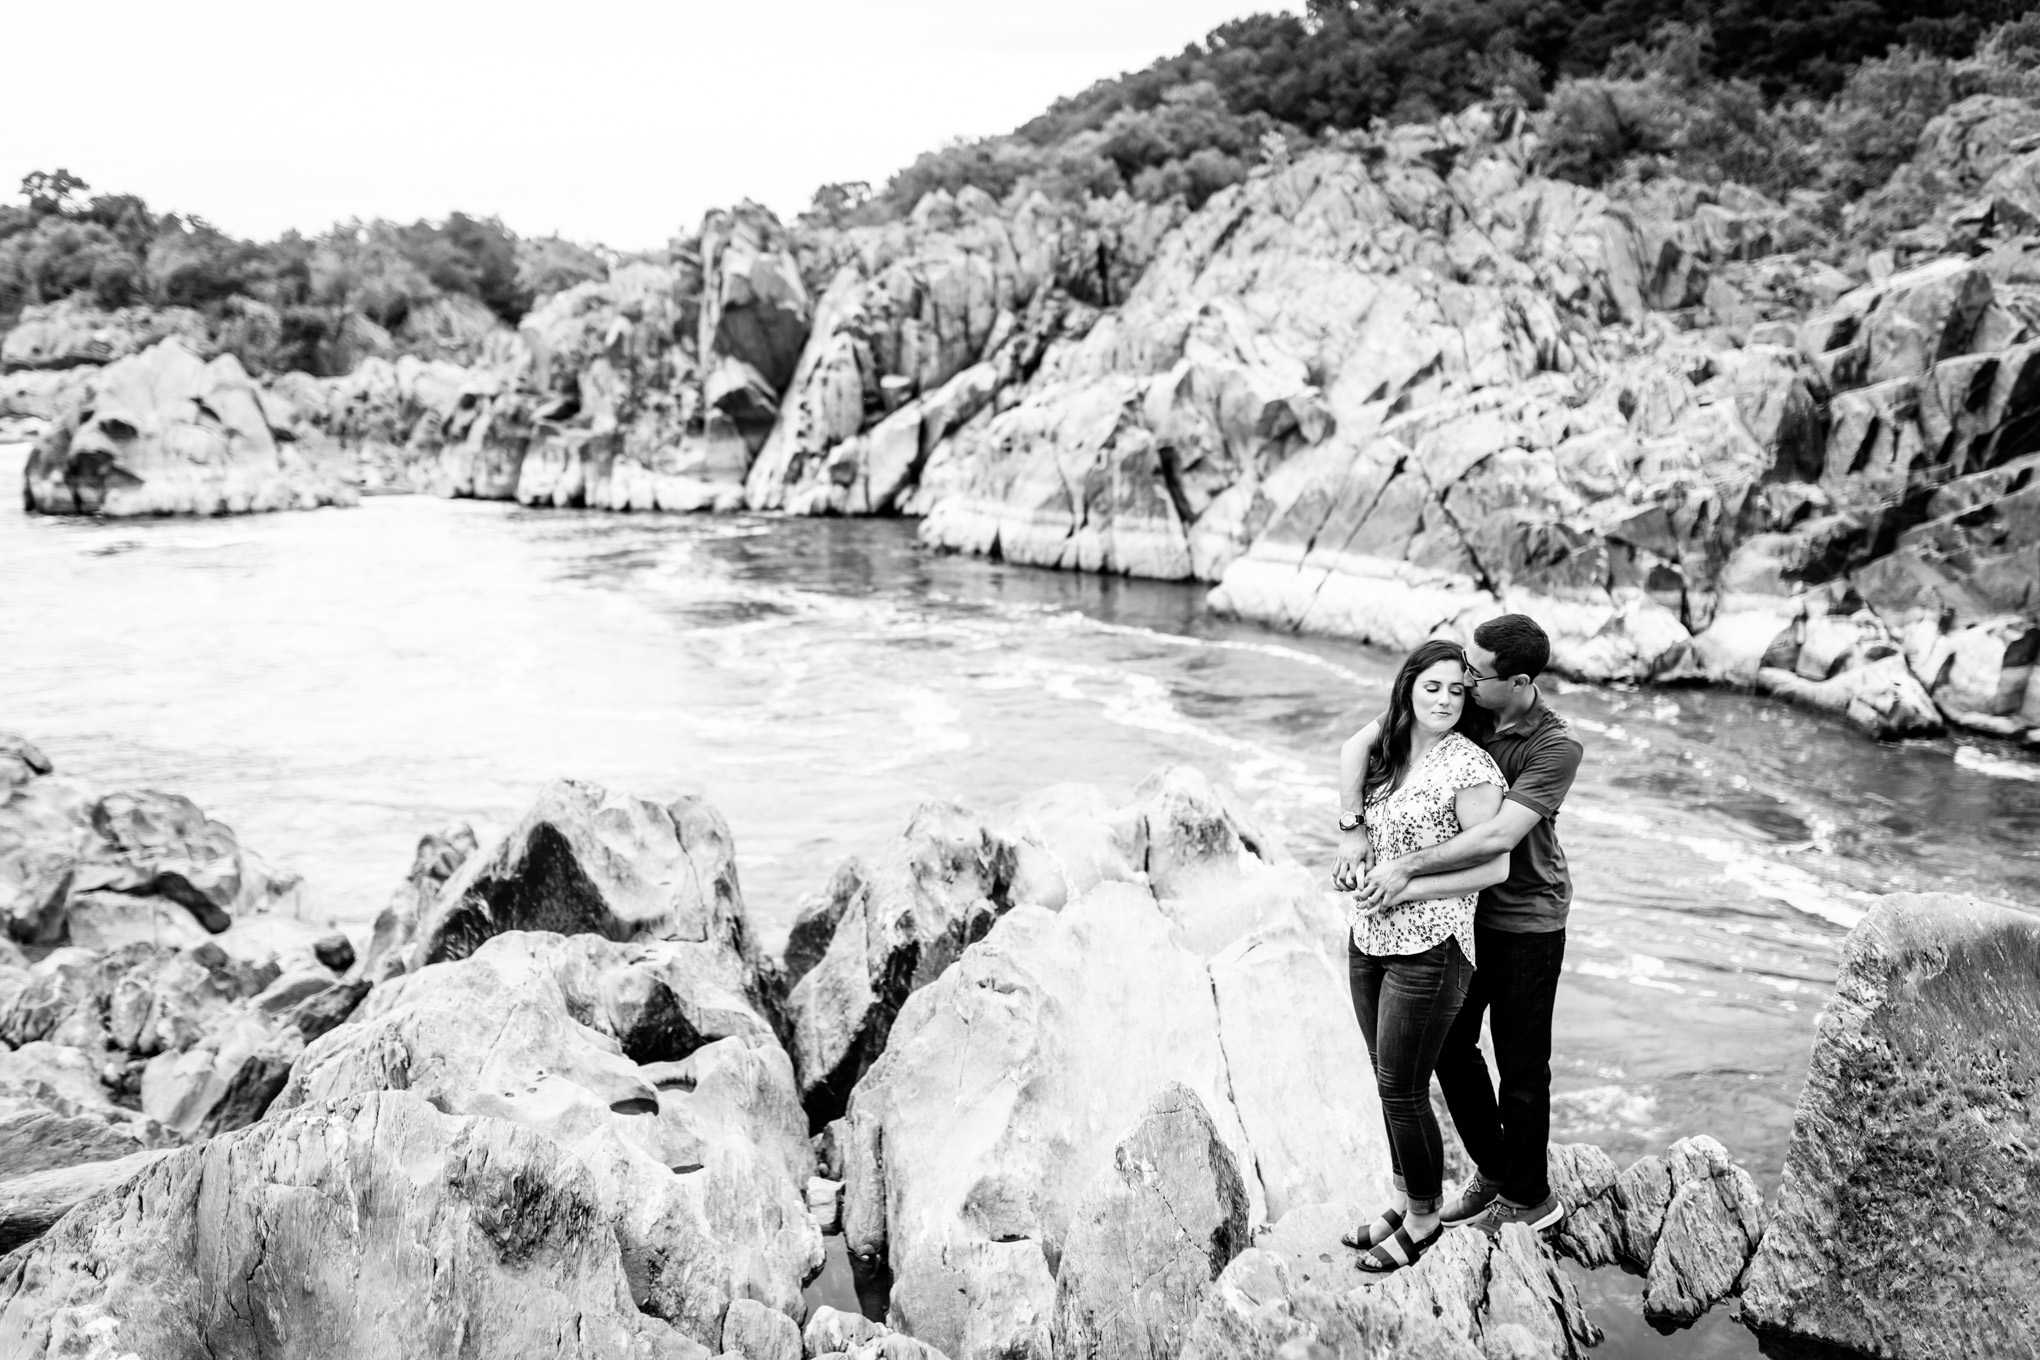 Great Falls Park engagement photos, Great Falls Park, Great Falls Virginia, national park, Great Falls, Great Falls engagement photos, Virginia engagement photos, Virginia engagement photographer, Rachel E.H. Photography, engaged couple, engagement session style, outdoorsy engagement photos, hiking engagement photos, couple standing on rocks, epic portrait